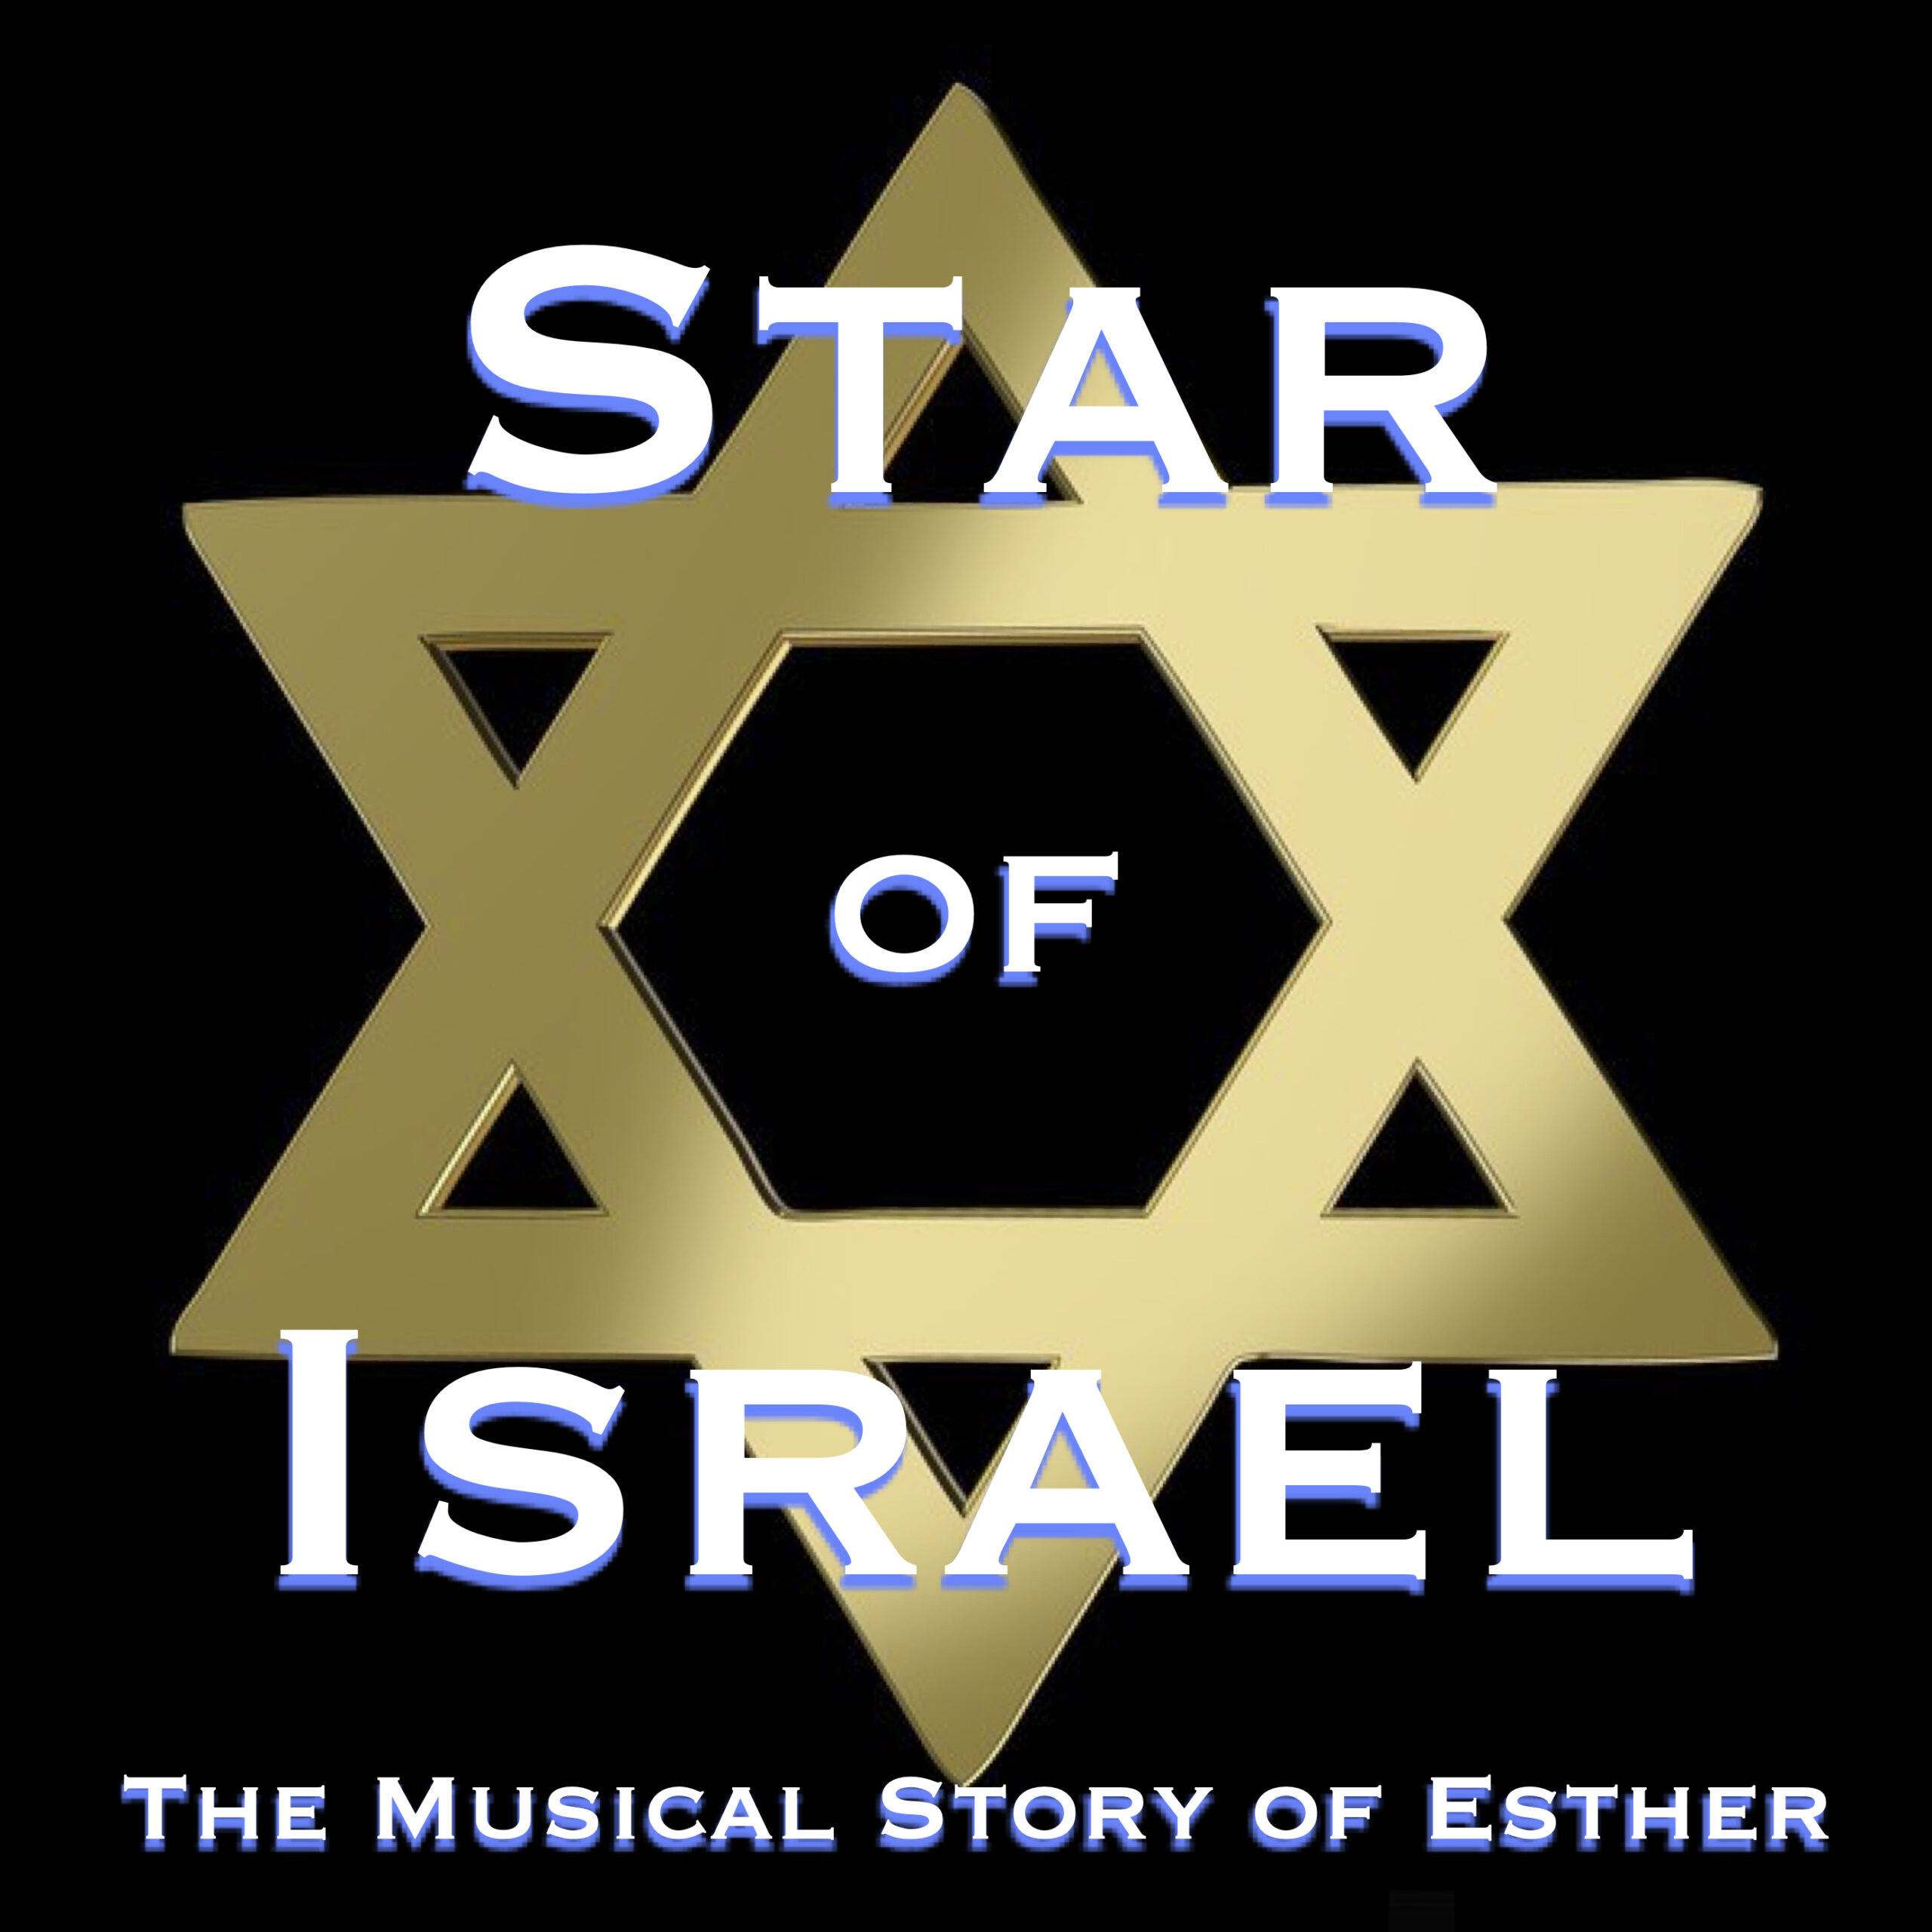 STAR OF ISRAEL • The Musical Story of Esther